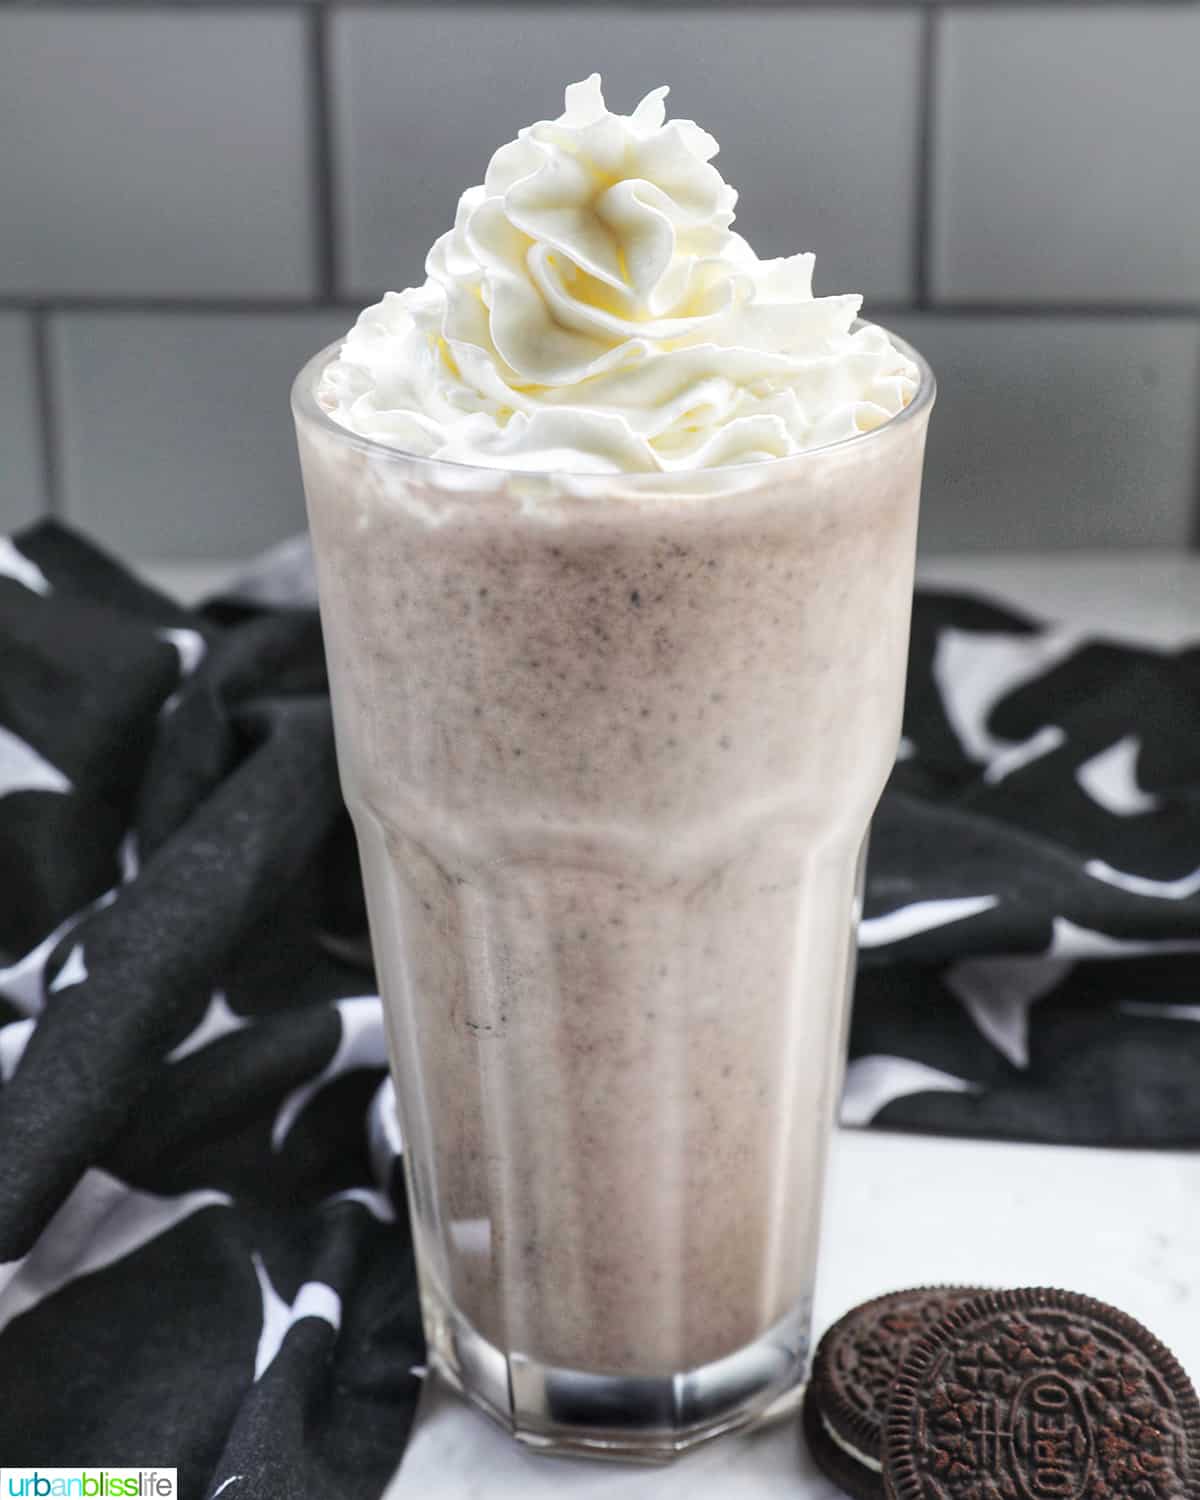 Cookies & Cream Milkshake in a tall glass with whipped cream topping.